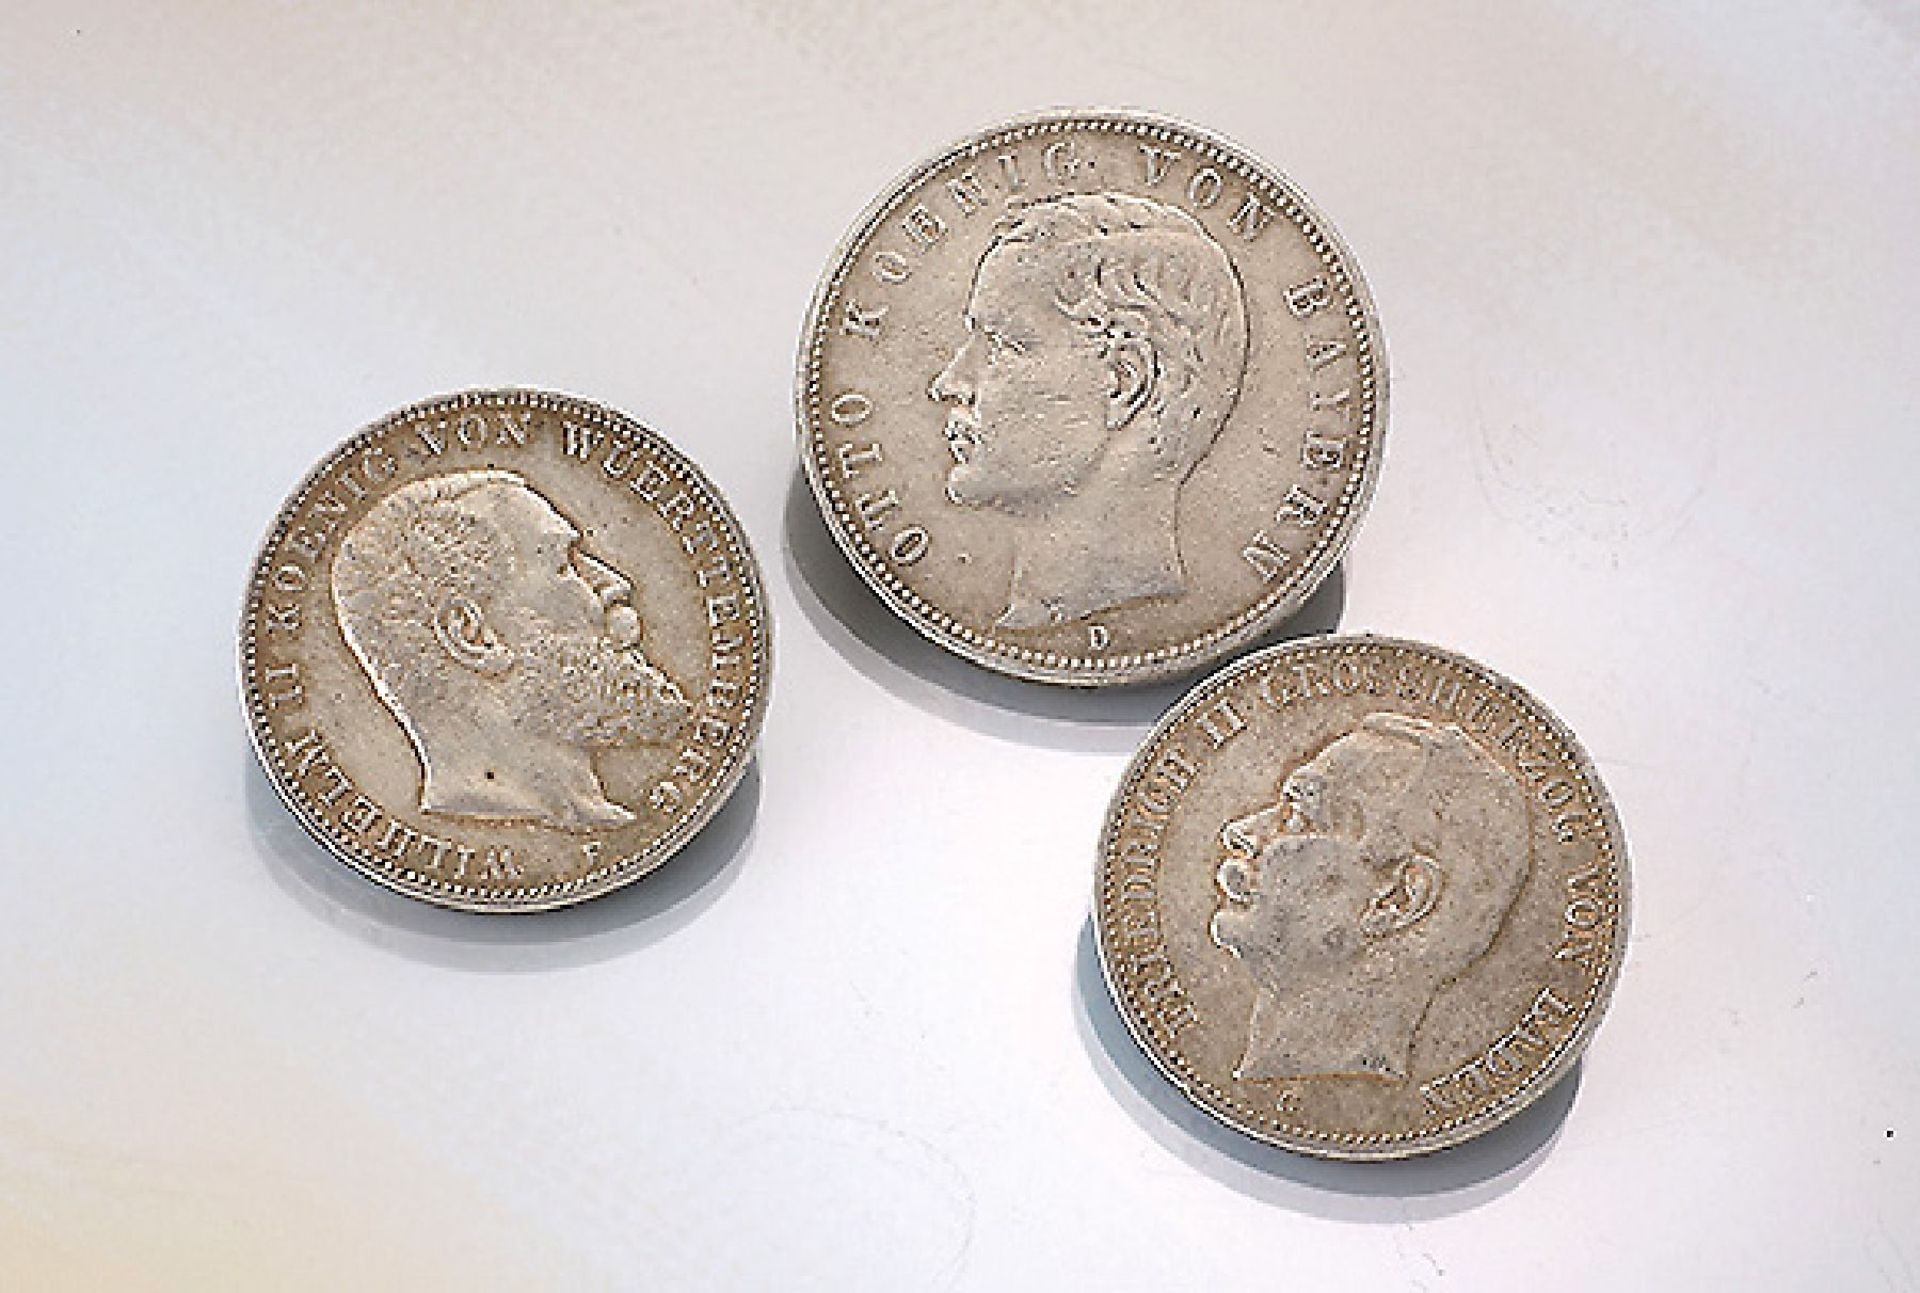 Lot 11 silver coins, German Reich , comprised of: 2 x 5 Mark, 1903 and 1907, as well as 3 x 3